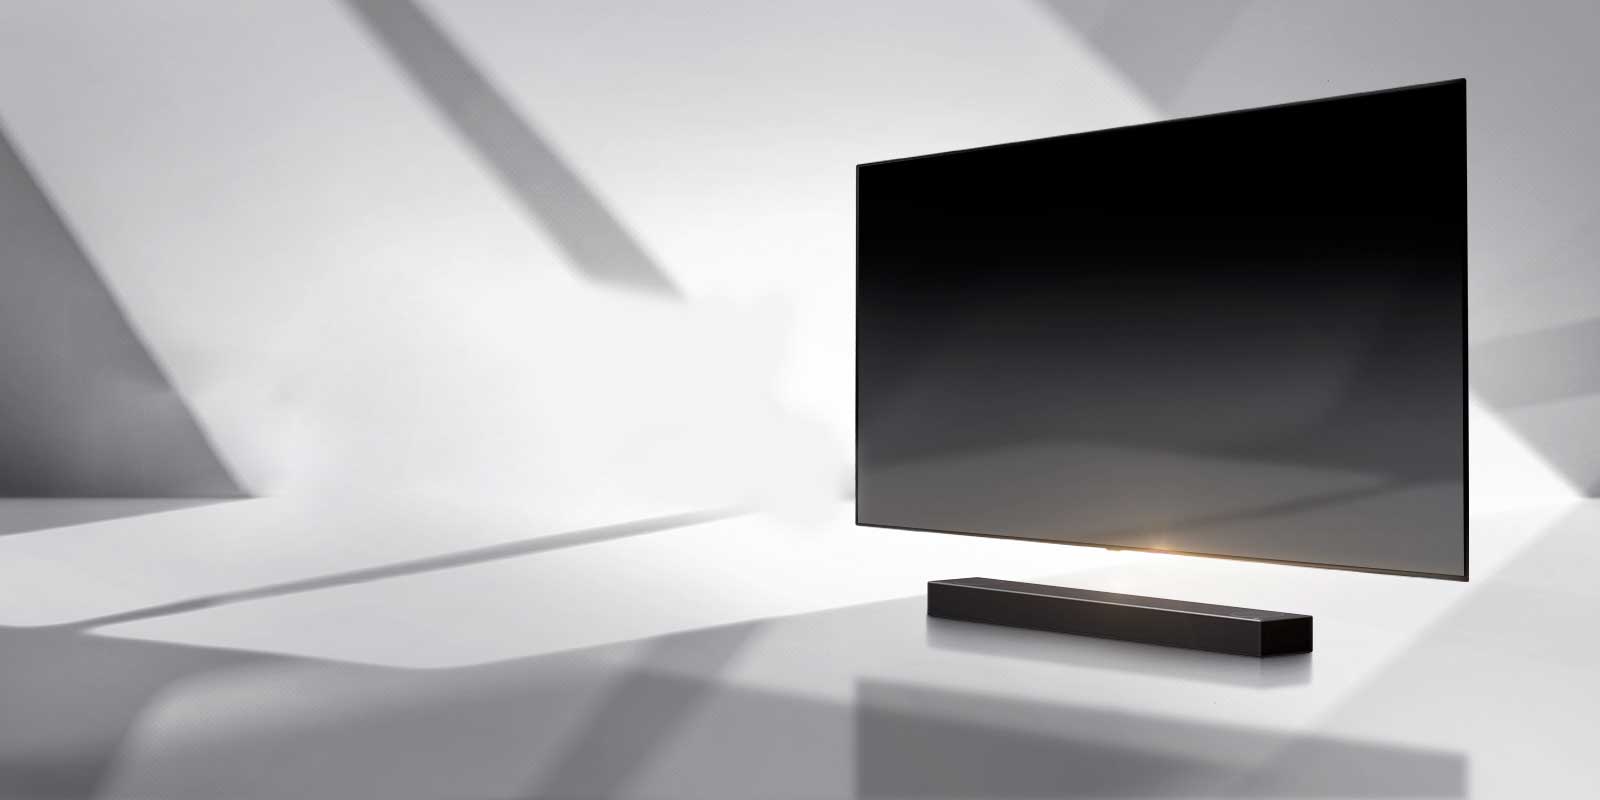 A soundbar and a TV are placed on a white floor and there is a shadow coming from outside right behind.